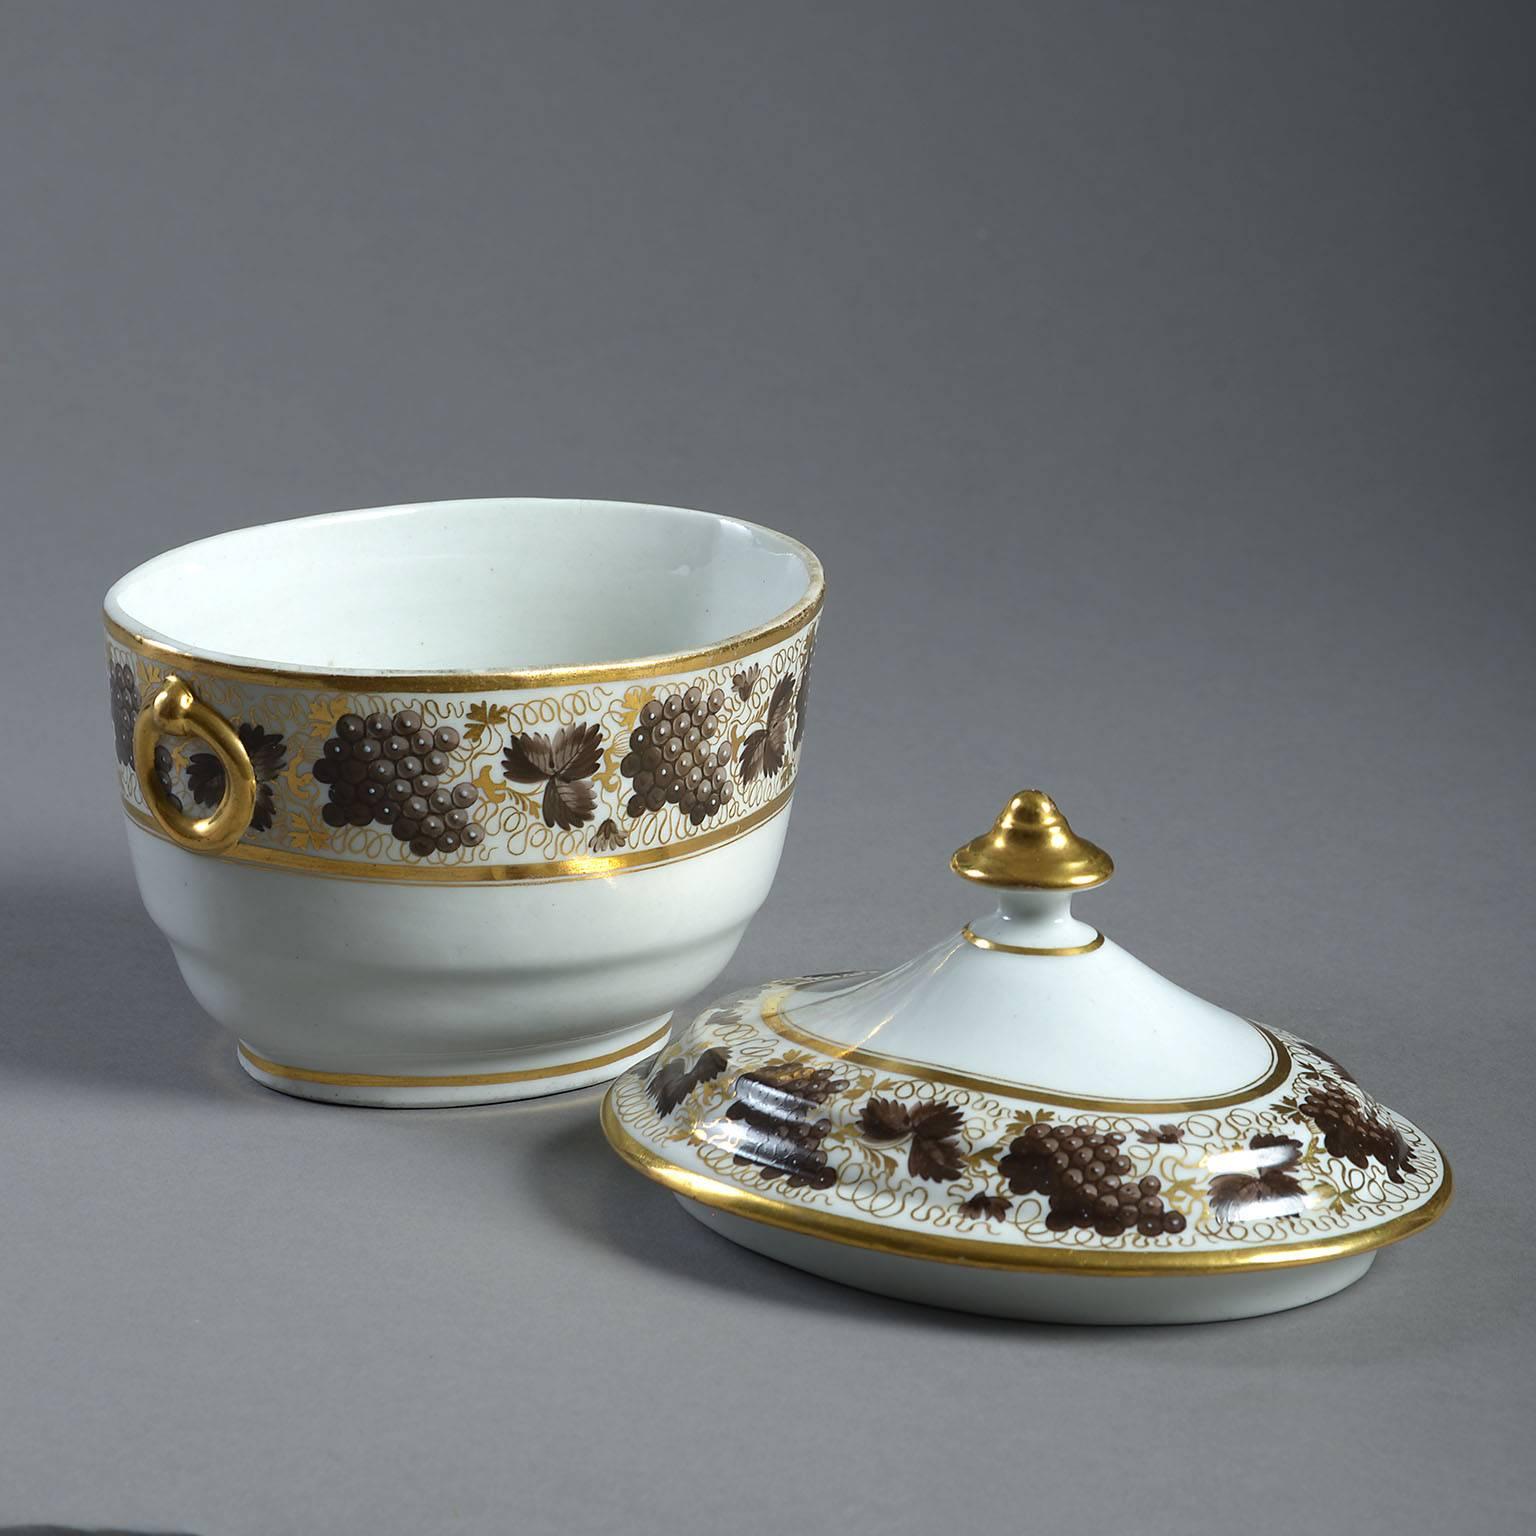 The oval body with moulded ring handles decorated with fruiting vines in puce and gilt. The base with incised 